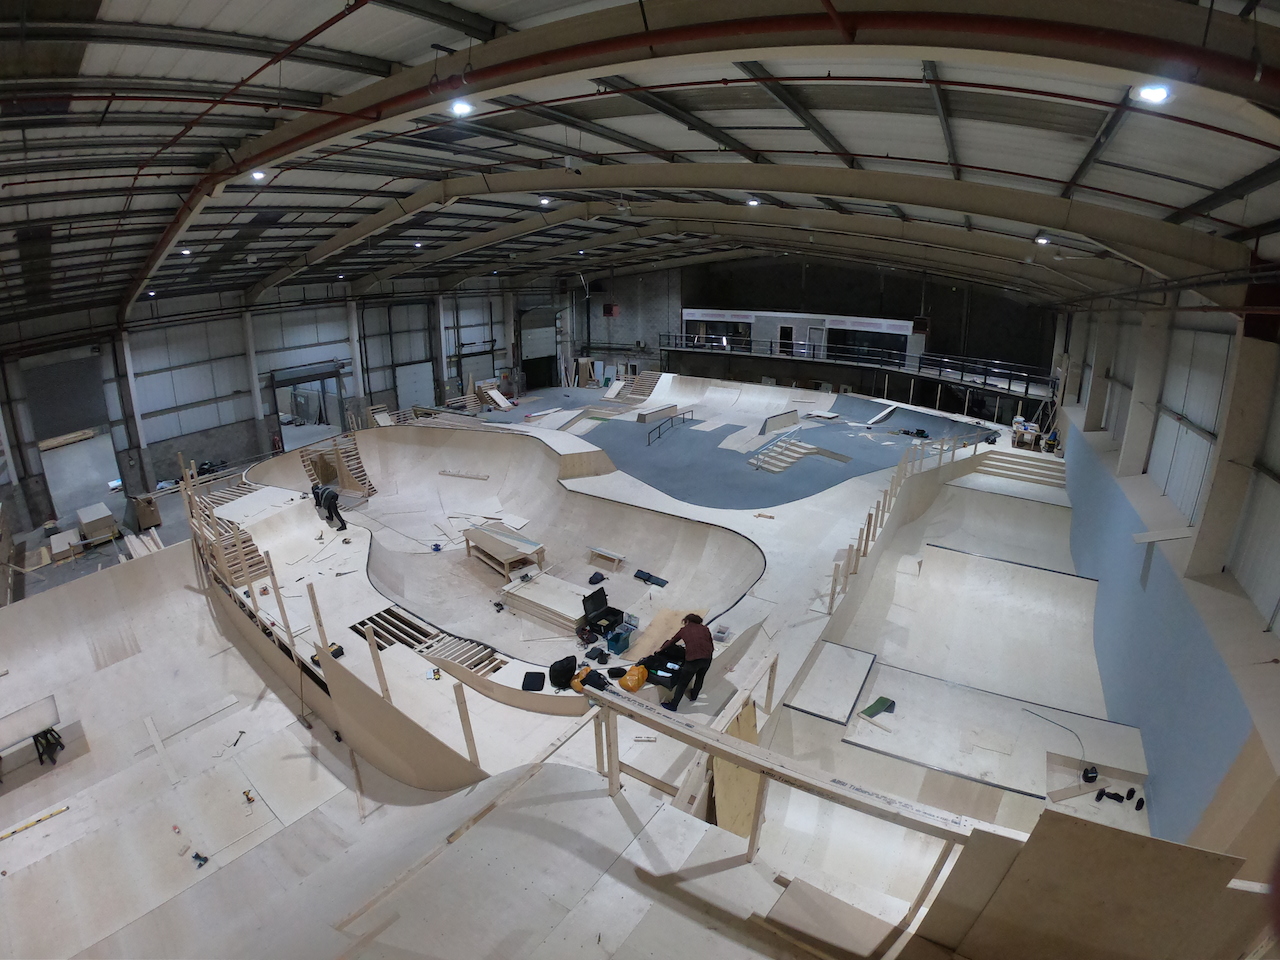 Graystone Manchester site under construction. Shot taken from atop the drop in for big air to foam pit. Photo Dave Thompson.